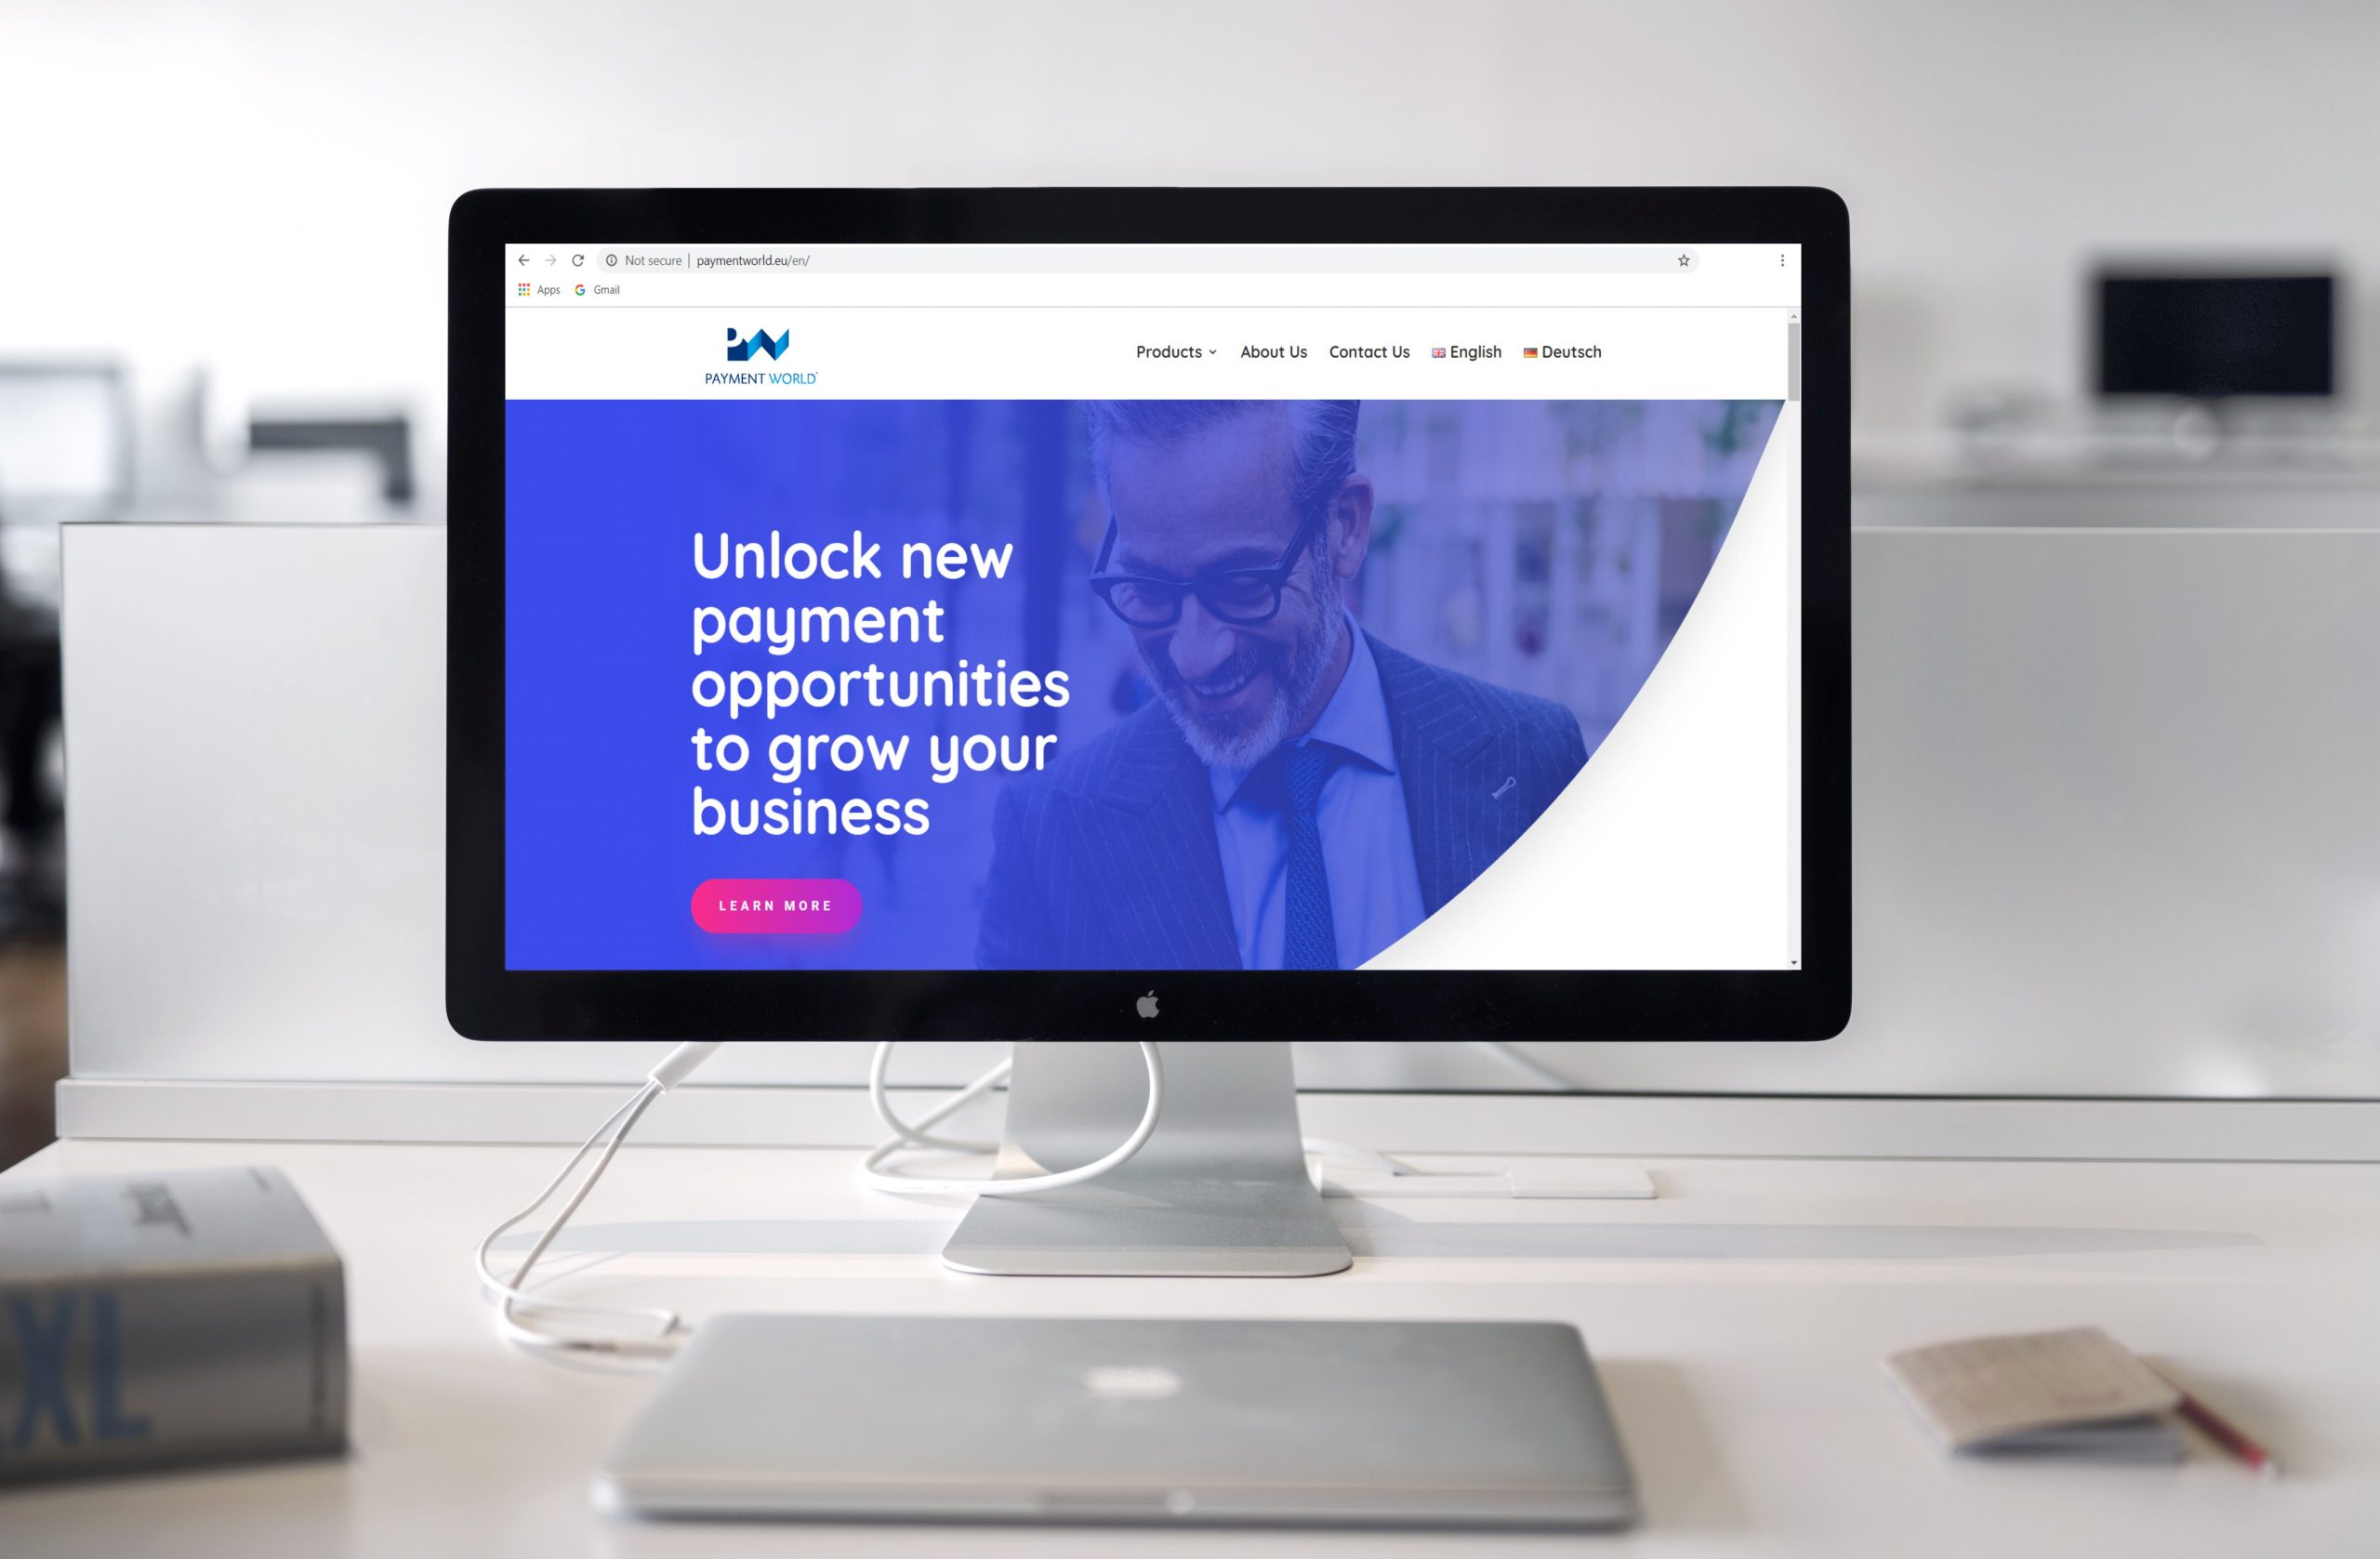 Paymentworld Europe targets further growth with new website launch